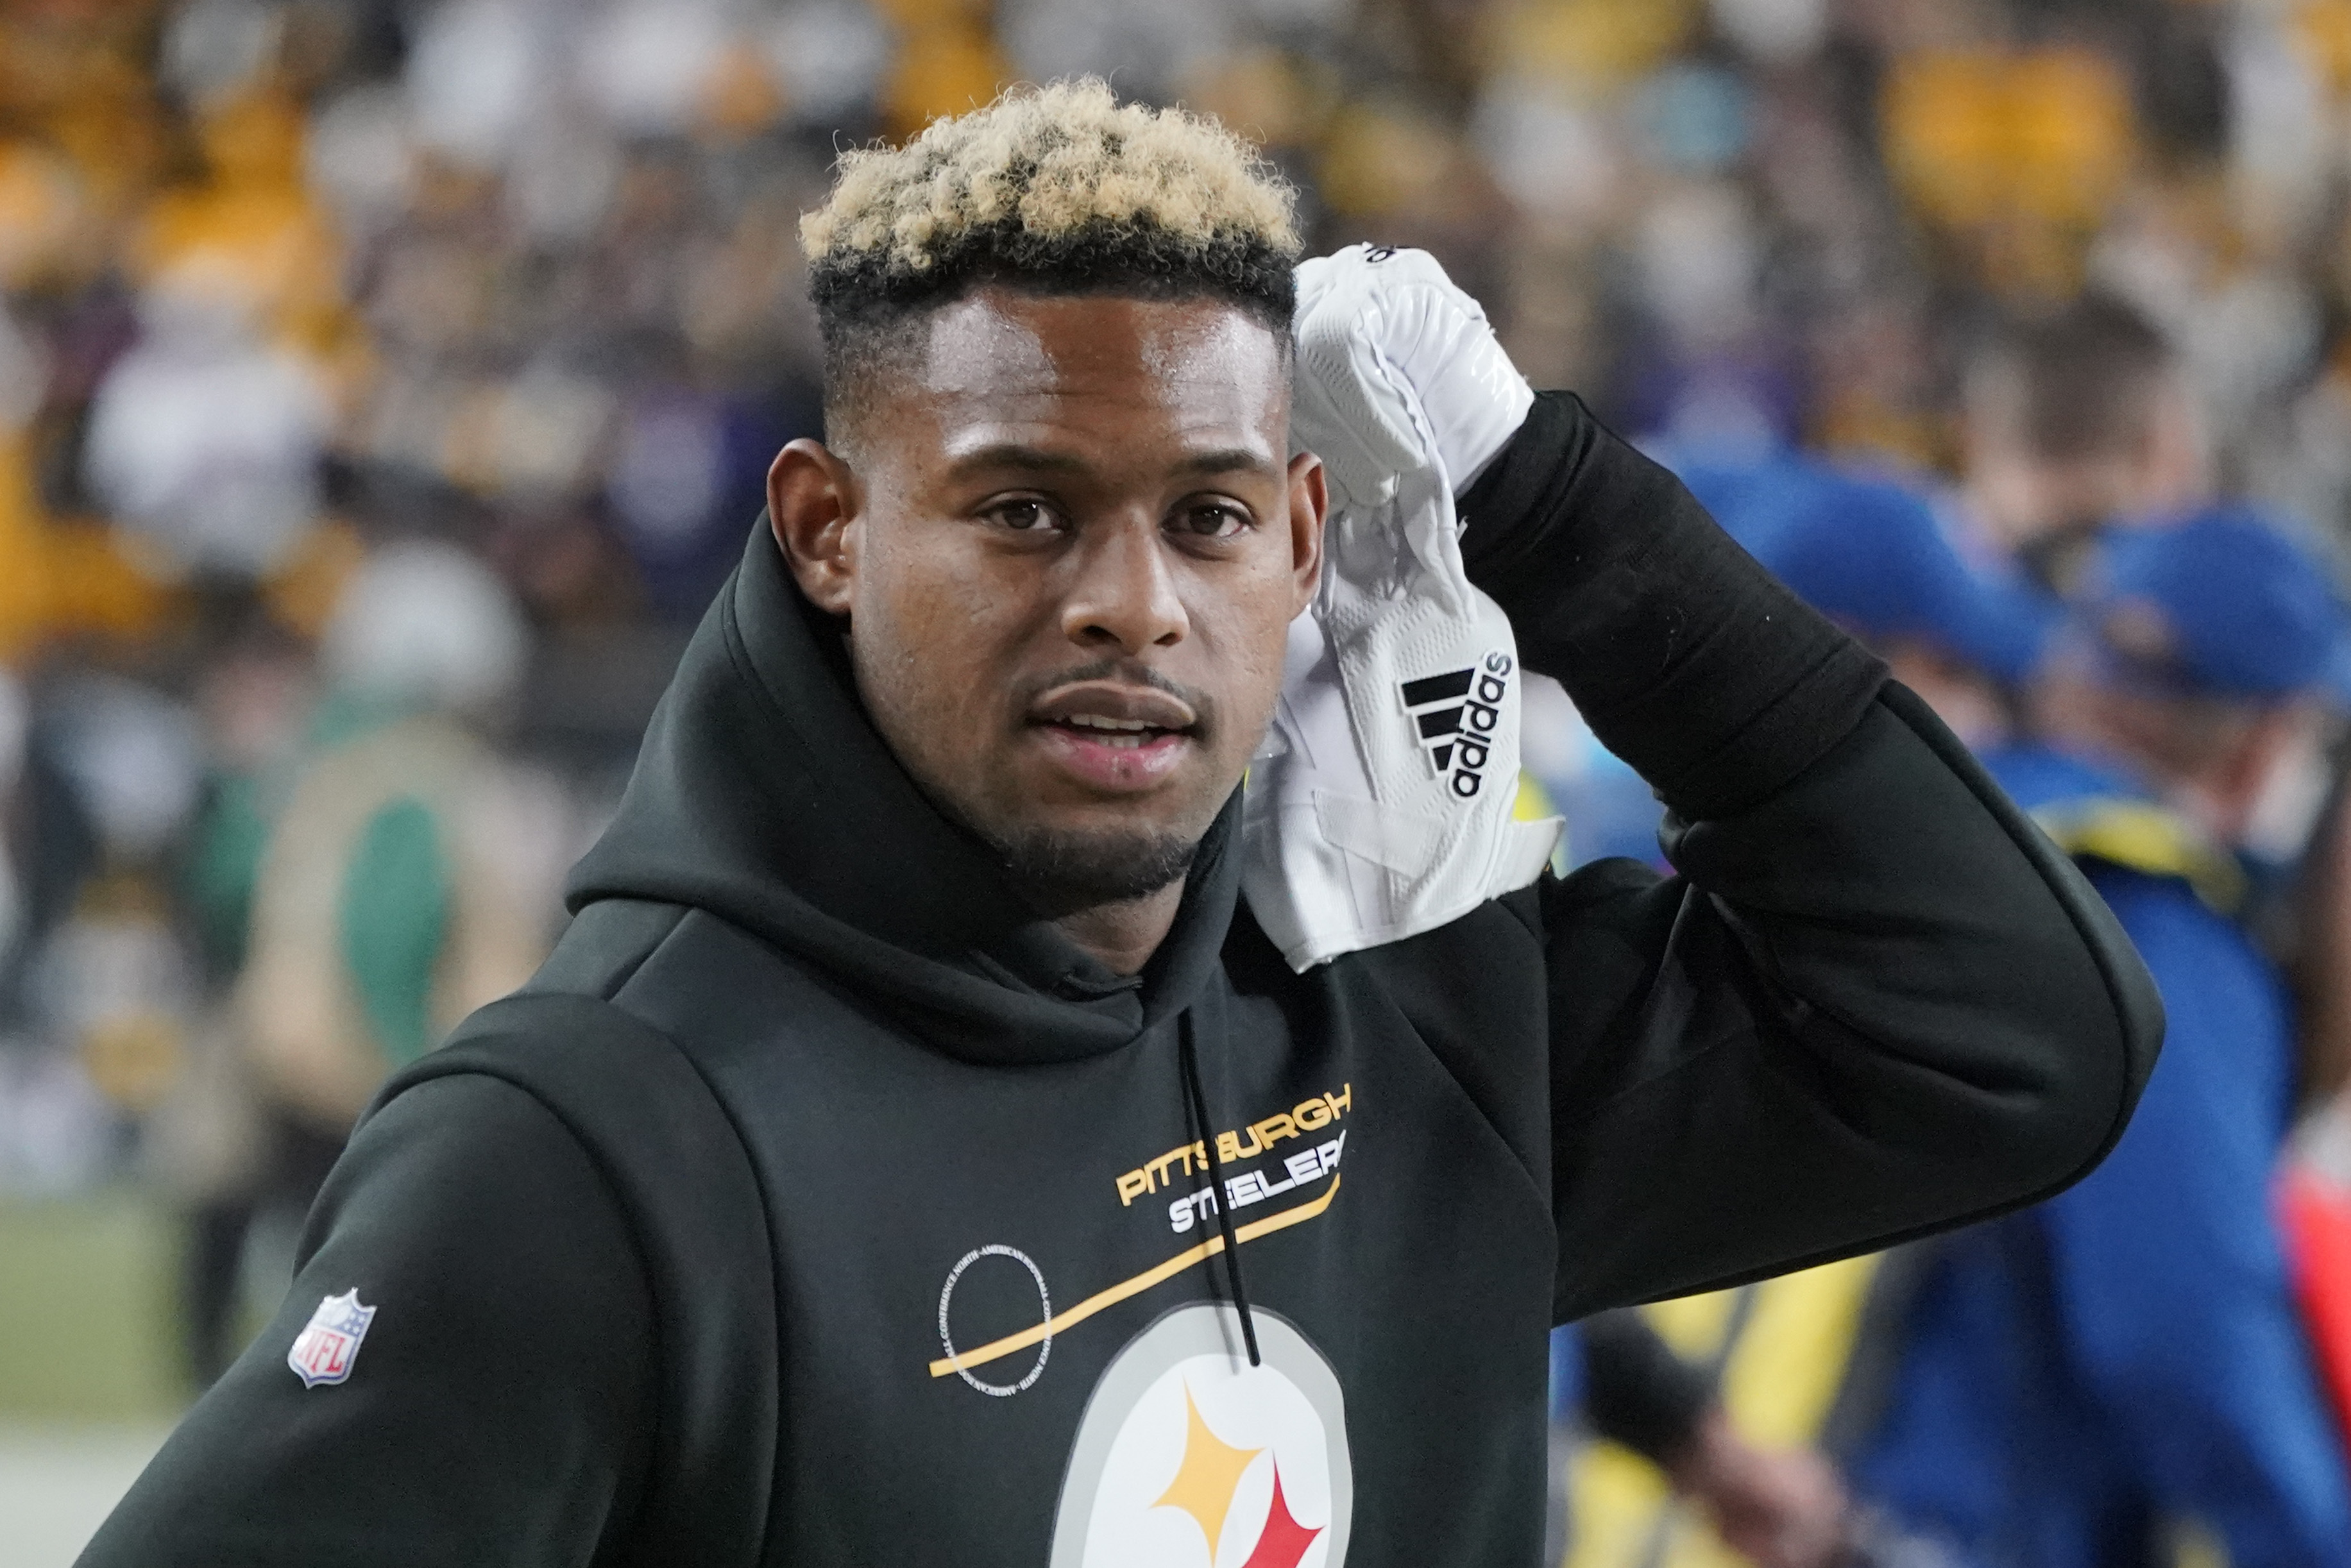 Steelers' JuJu Smith-Schuster Activated off IR, Expected to Play vs. Chiefs